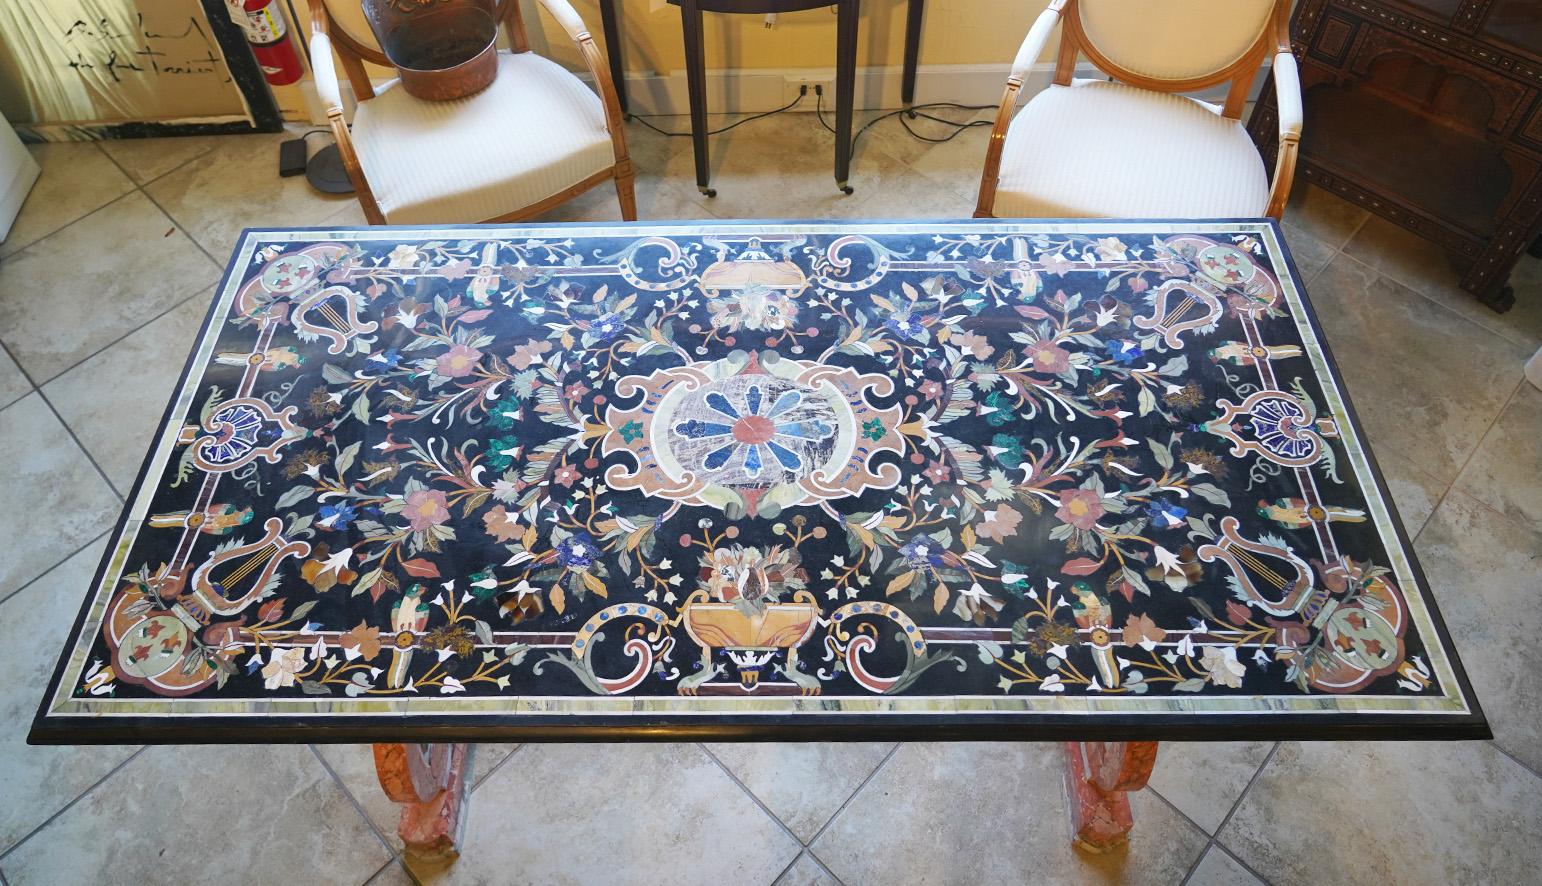 Measuring 36 x 72 inches and dating to the 20th century this grand Pietra Dura dining table features an elaborately inlaid stone top with flowers, classical themes and cartouches in a multitude of colors. The table top rests on twin carved and